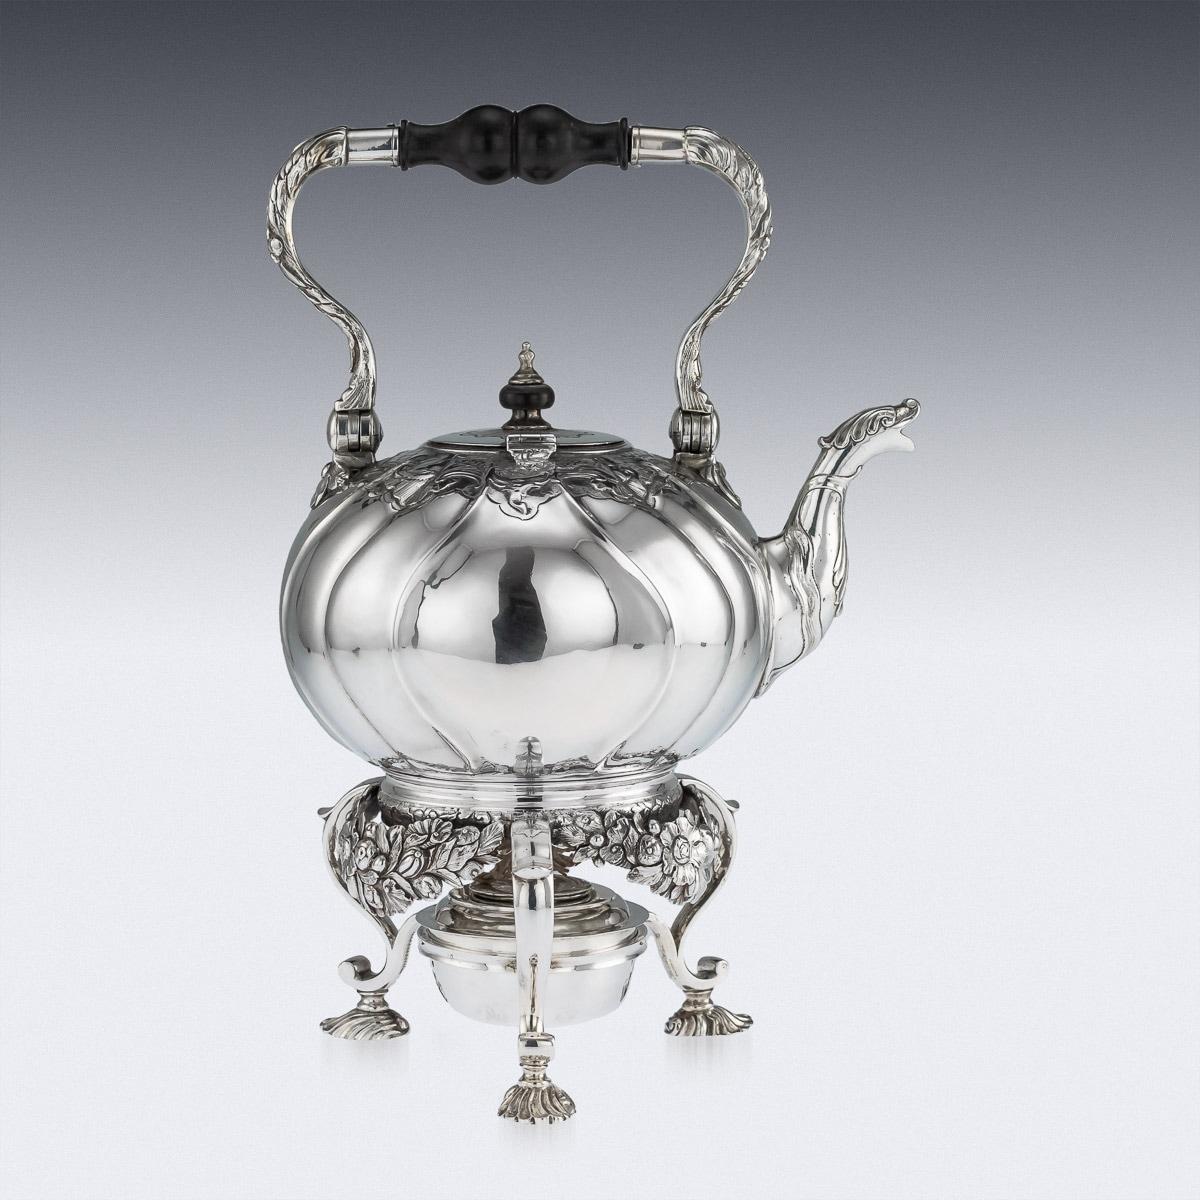 18th Century and Earlier Antique Imperial Russian Solid Silver Tea Kettle on Stand, Moscow, circa 1761